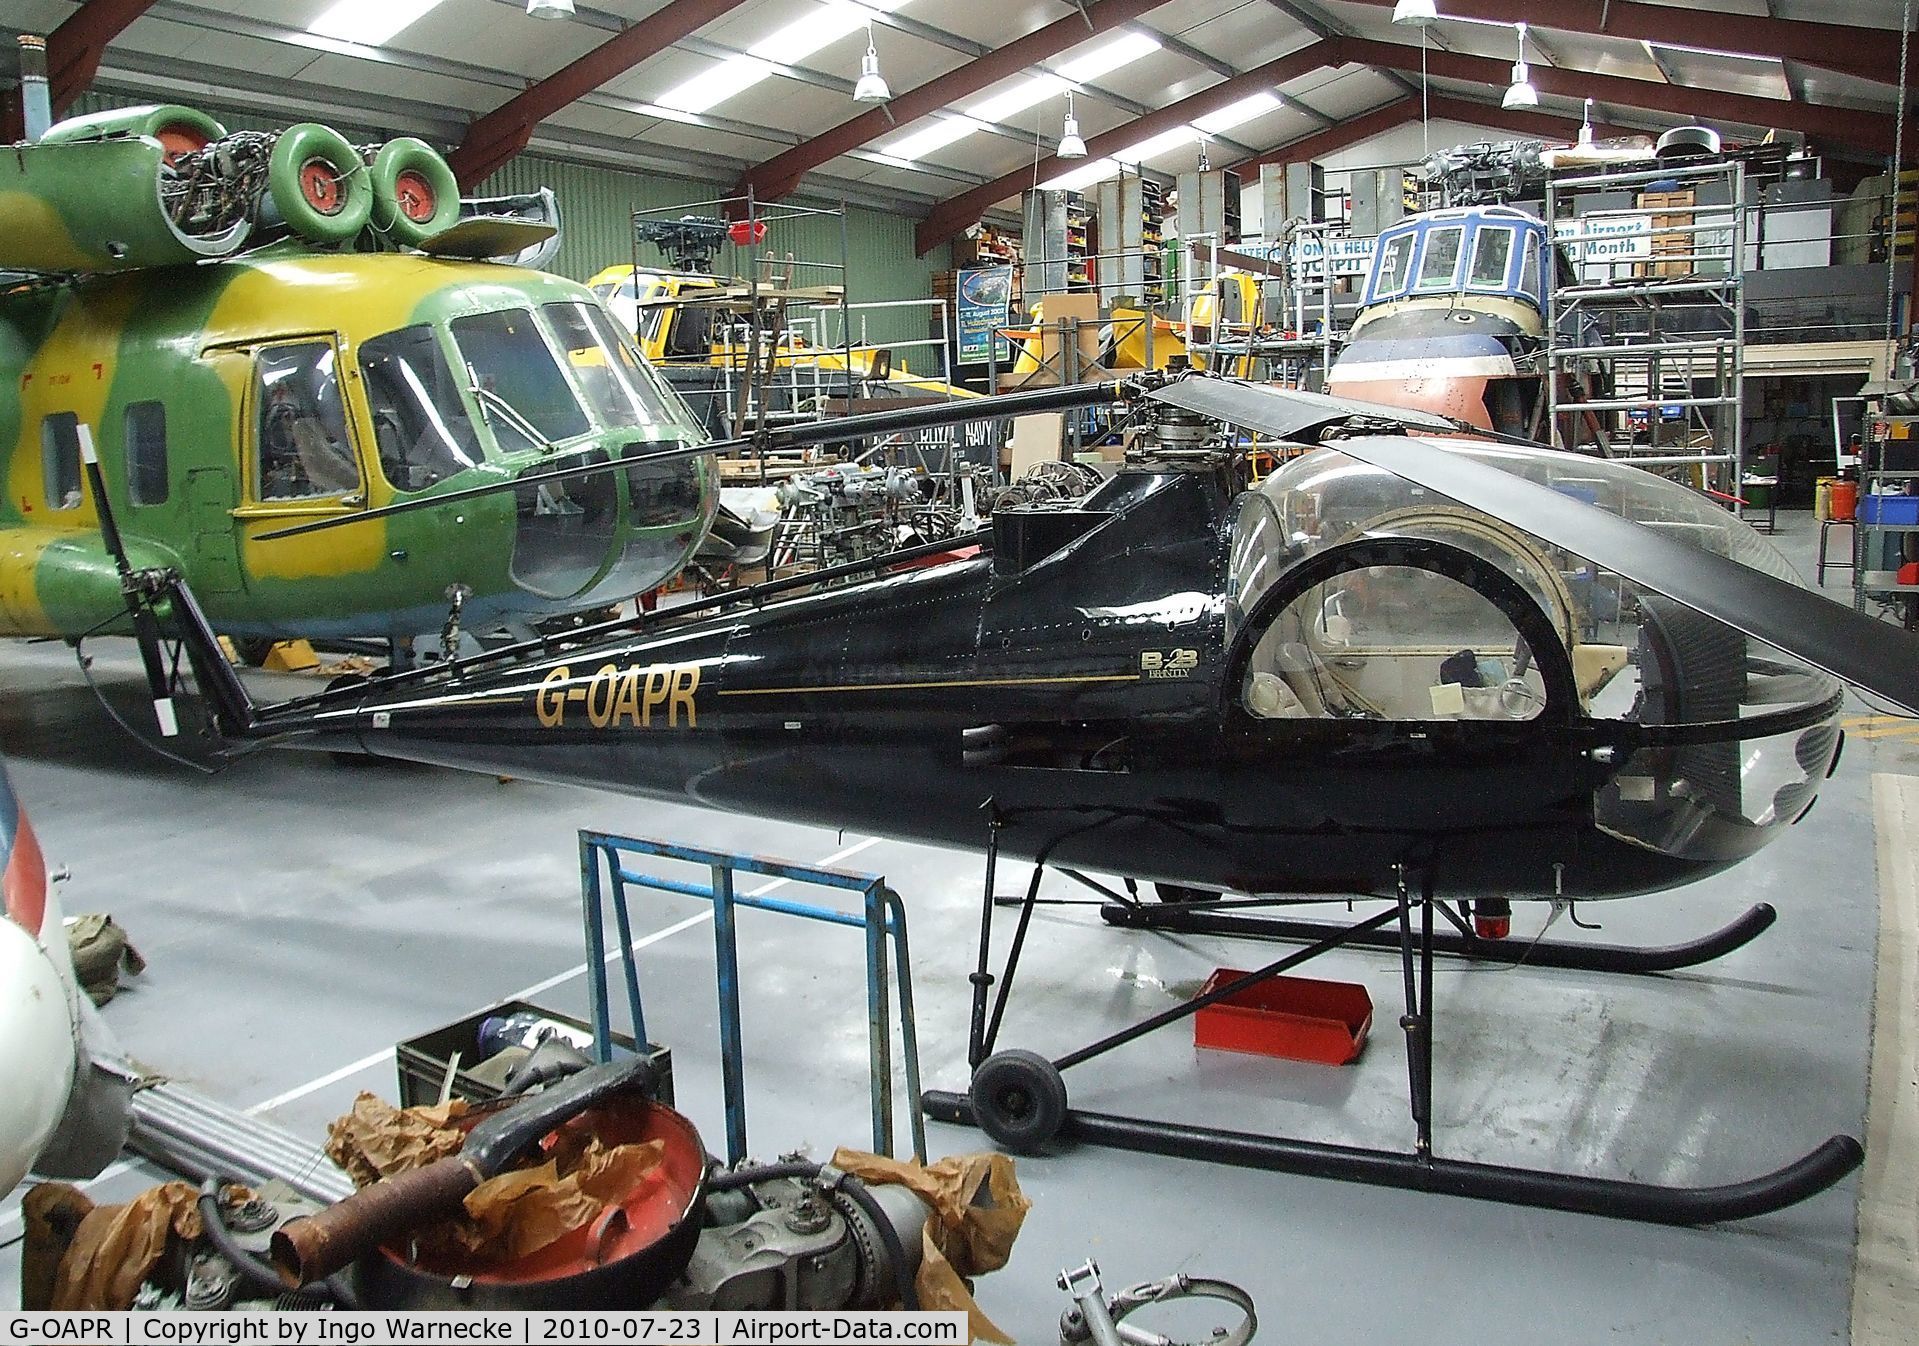 G-OAPR, 1965 Brantly B-2B C/N 446, Brantly B-2B at the hangar of the Helicopter Museum, Weston-super-Mare